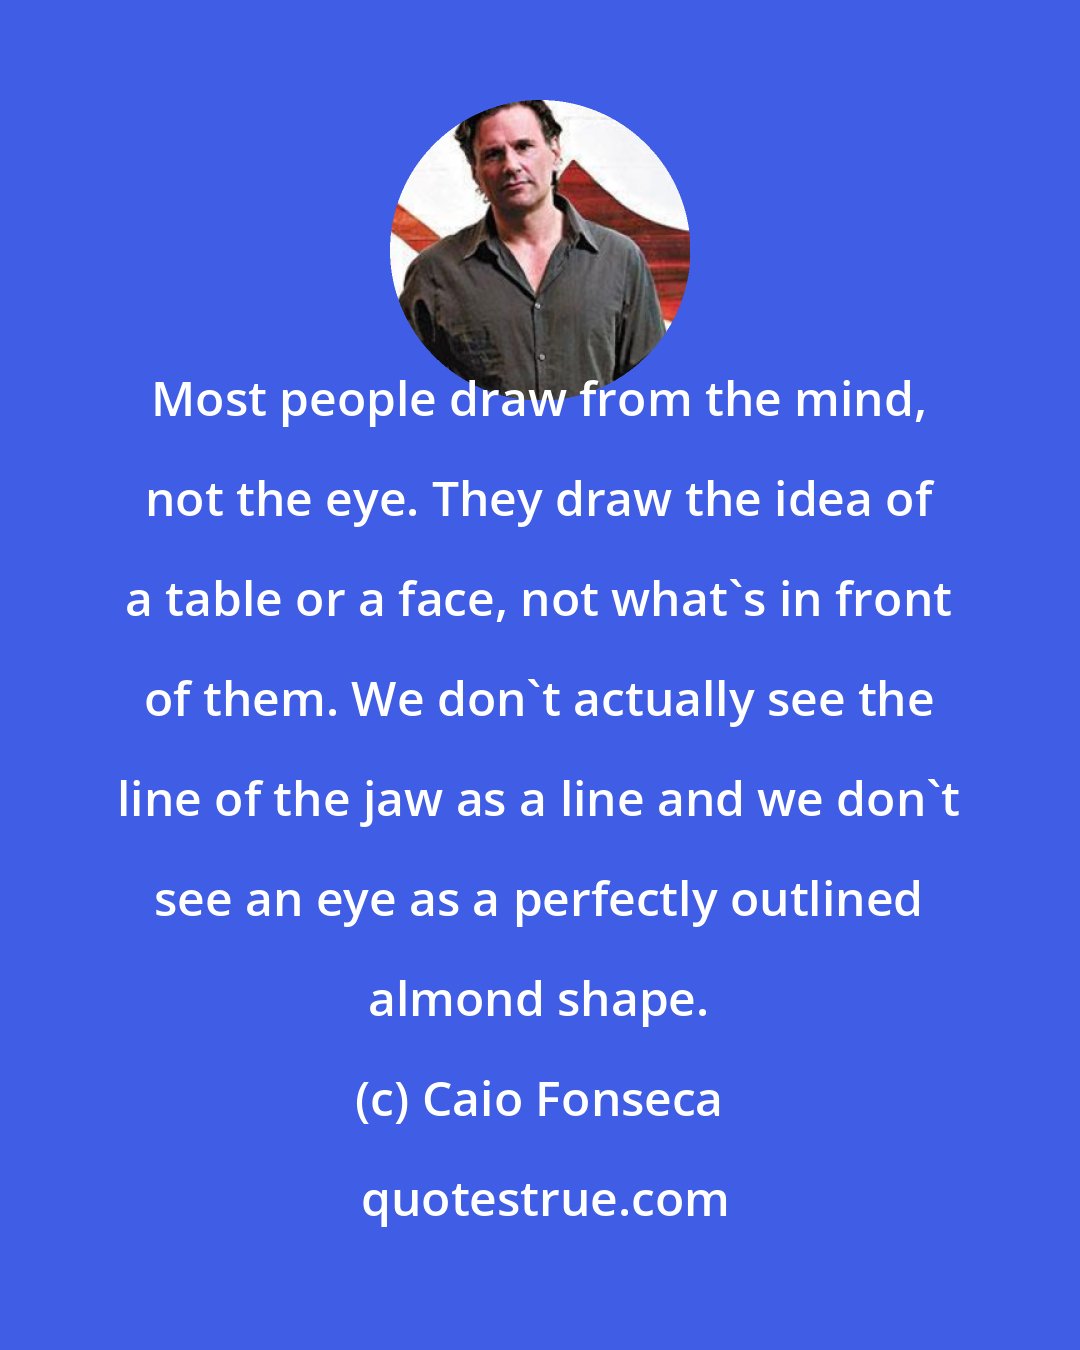 Caio Fonseca: Most people draw from the mind, not the eye. They draw the idea of a table or a face, not what's in front of them. We don't actually see the line of the jaw as a line and we don't see an eye as a perfectly outlined almond shape.